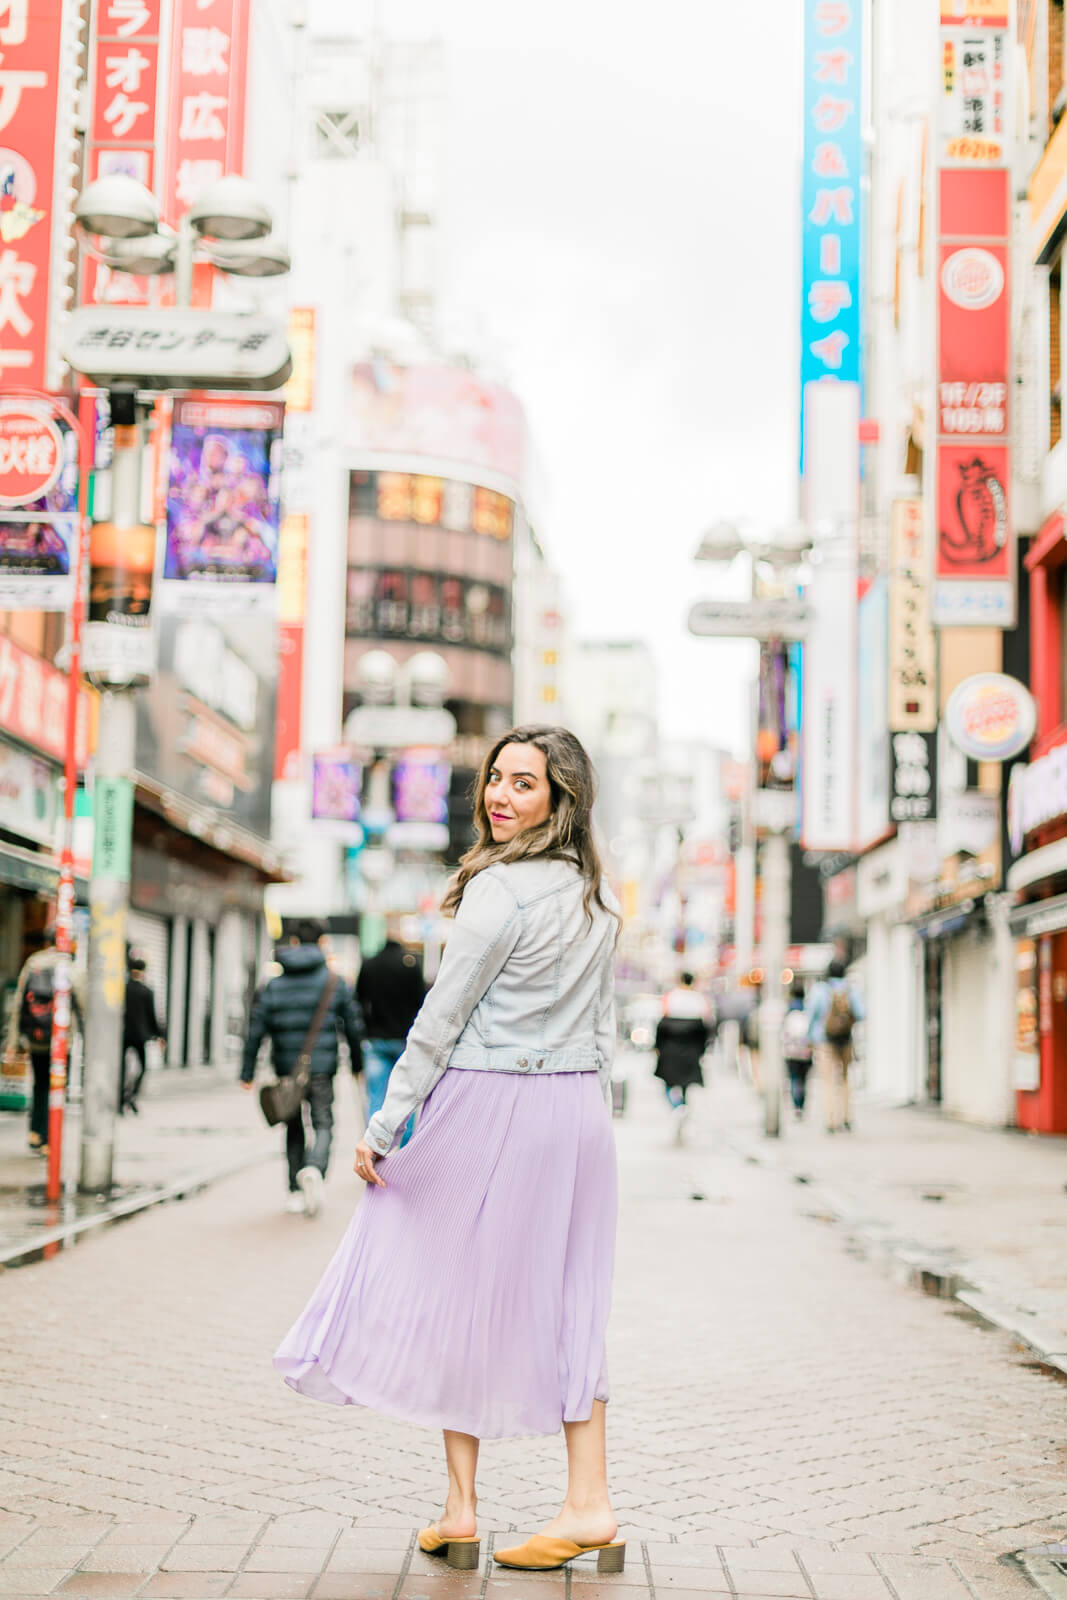 Visiting Japan was on our bucket list for years and we finally were able to make the trip! I'm sharing my best tips and tricks on this Tokyo travel guide!